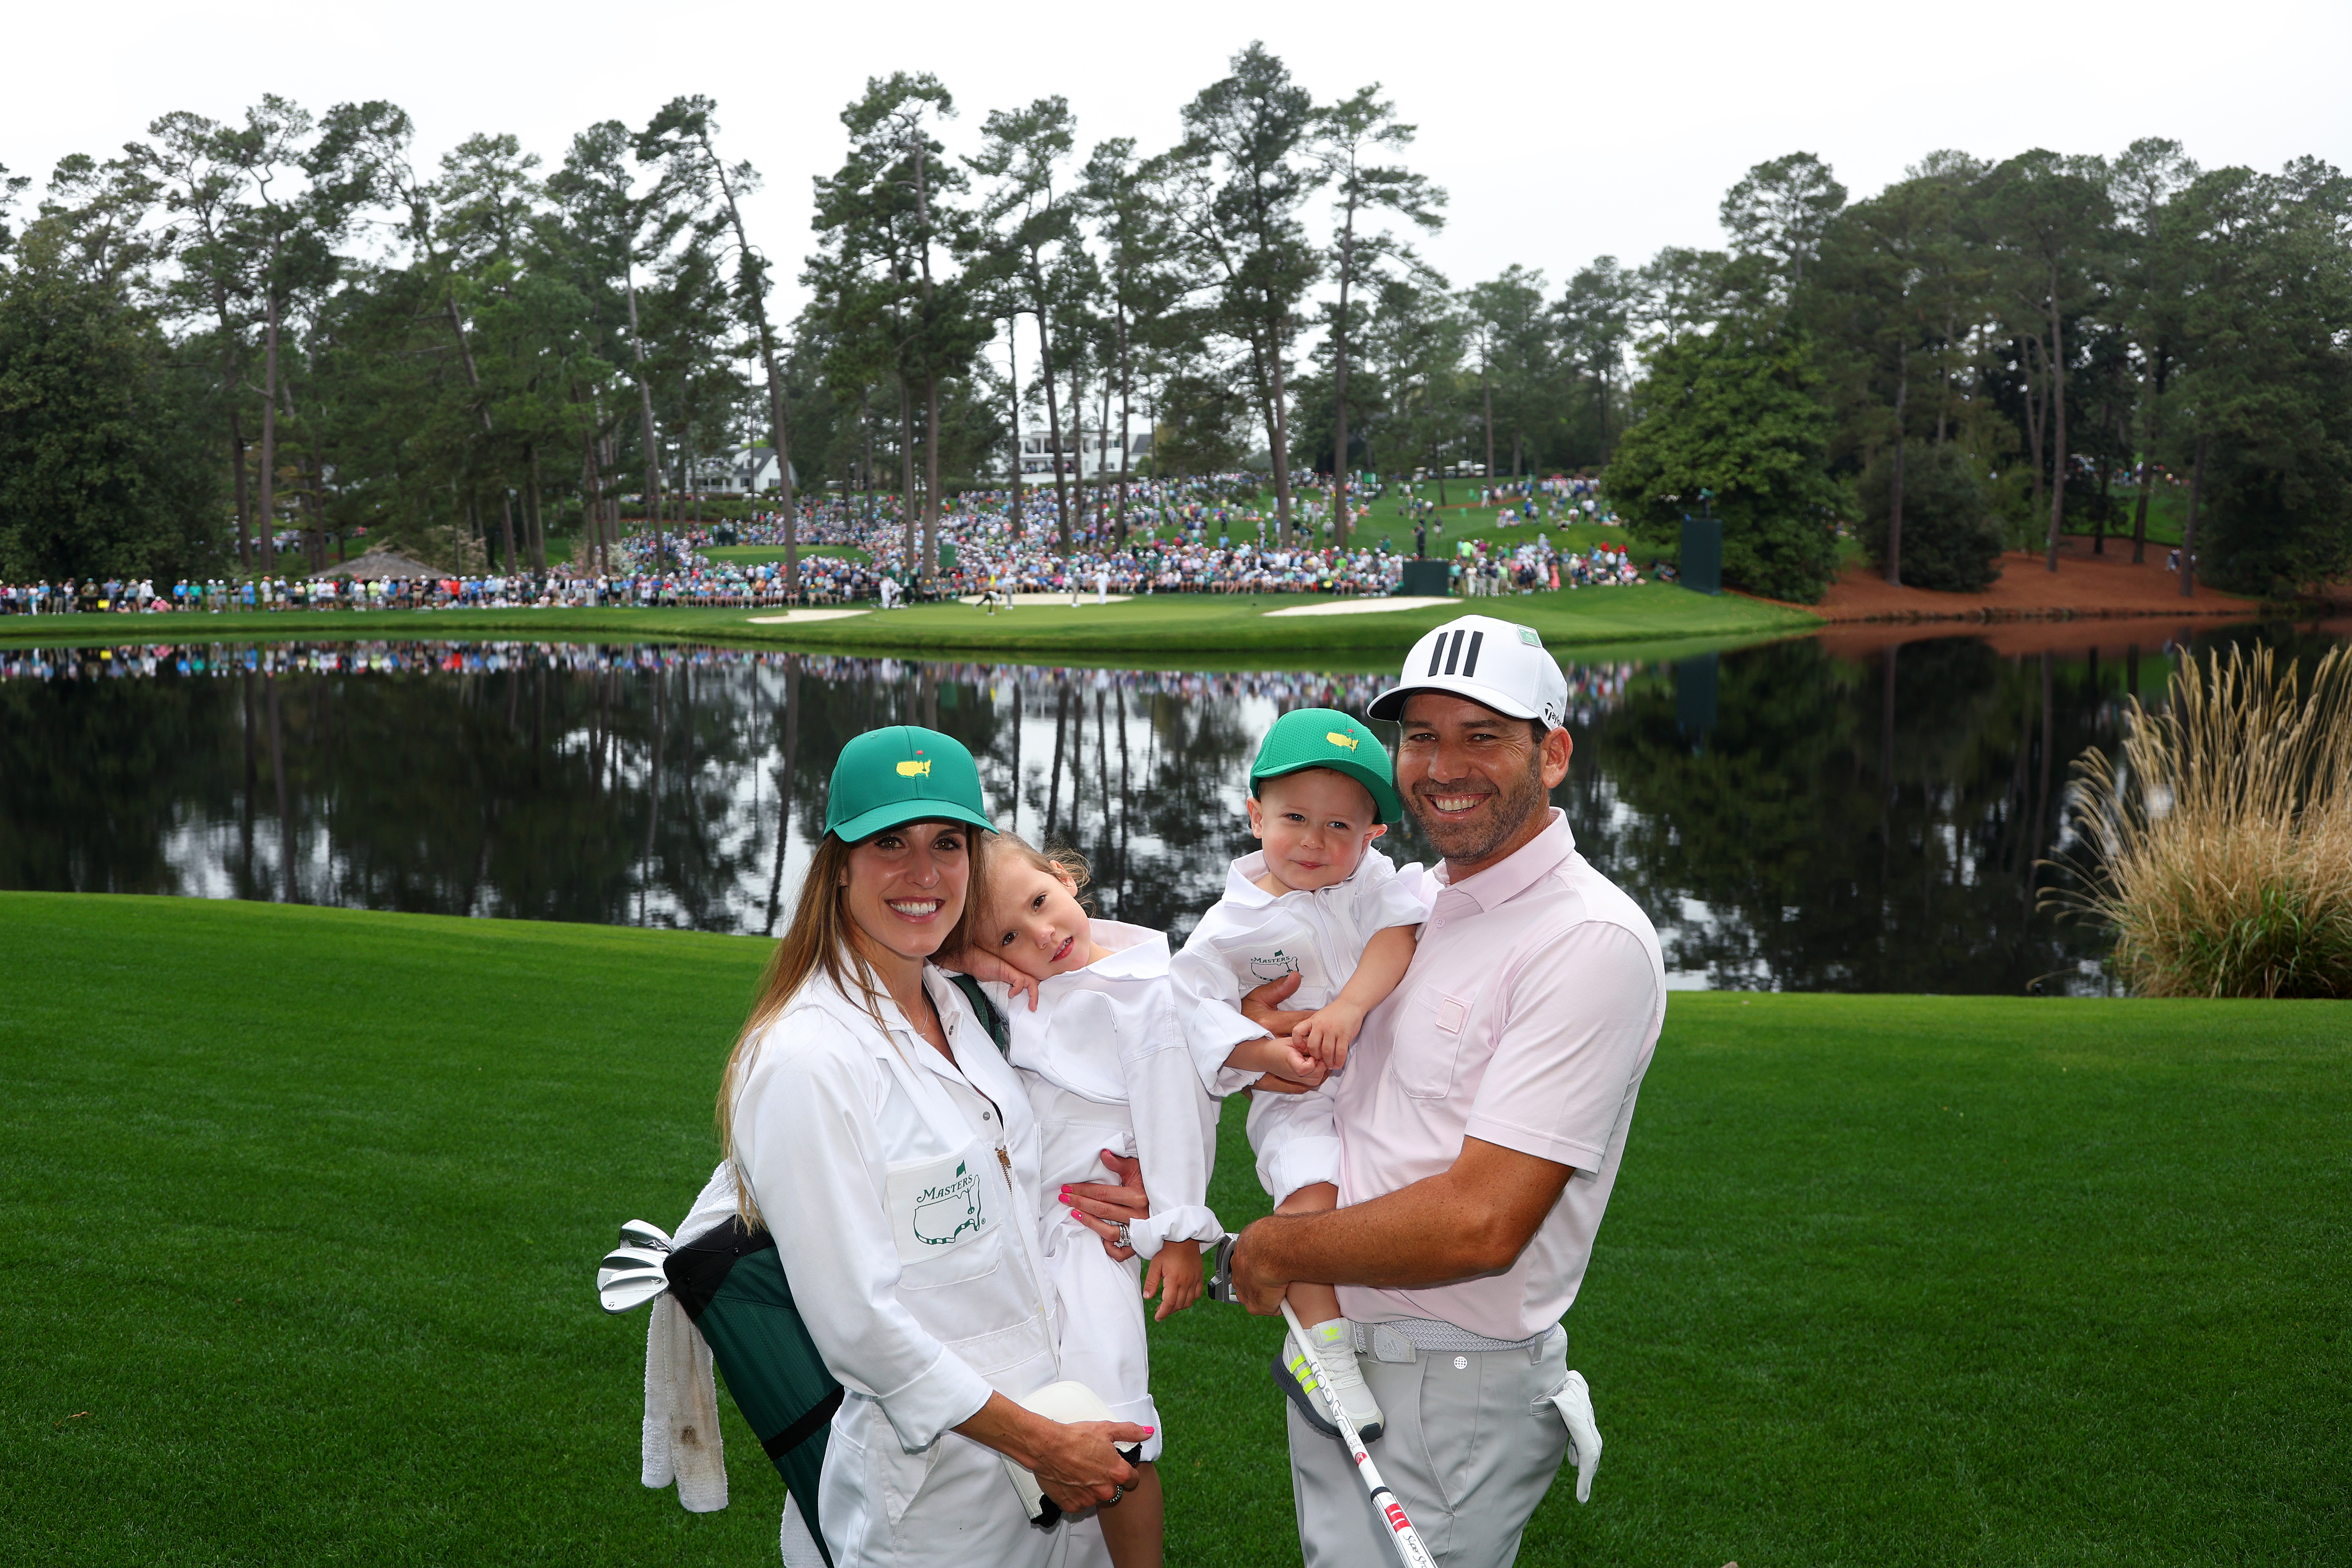 Garcia and family at the Masters Par 3 event